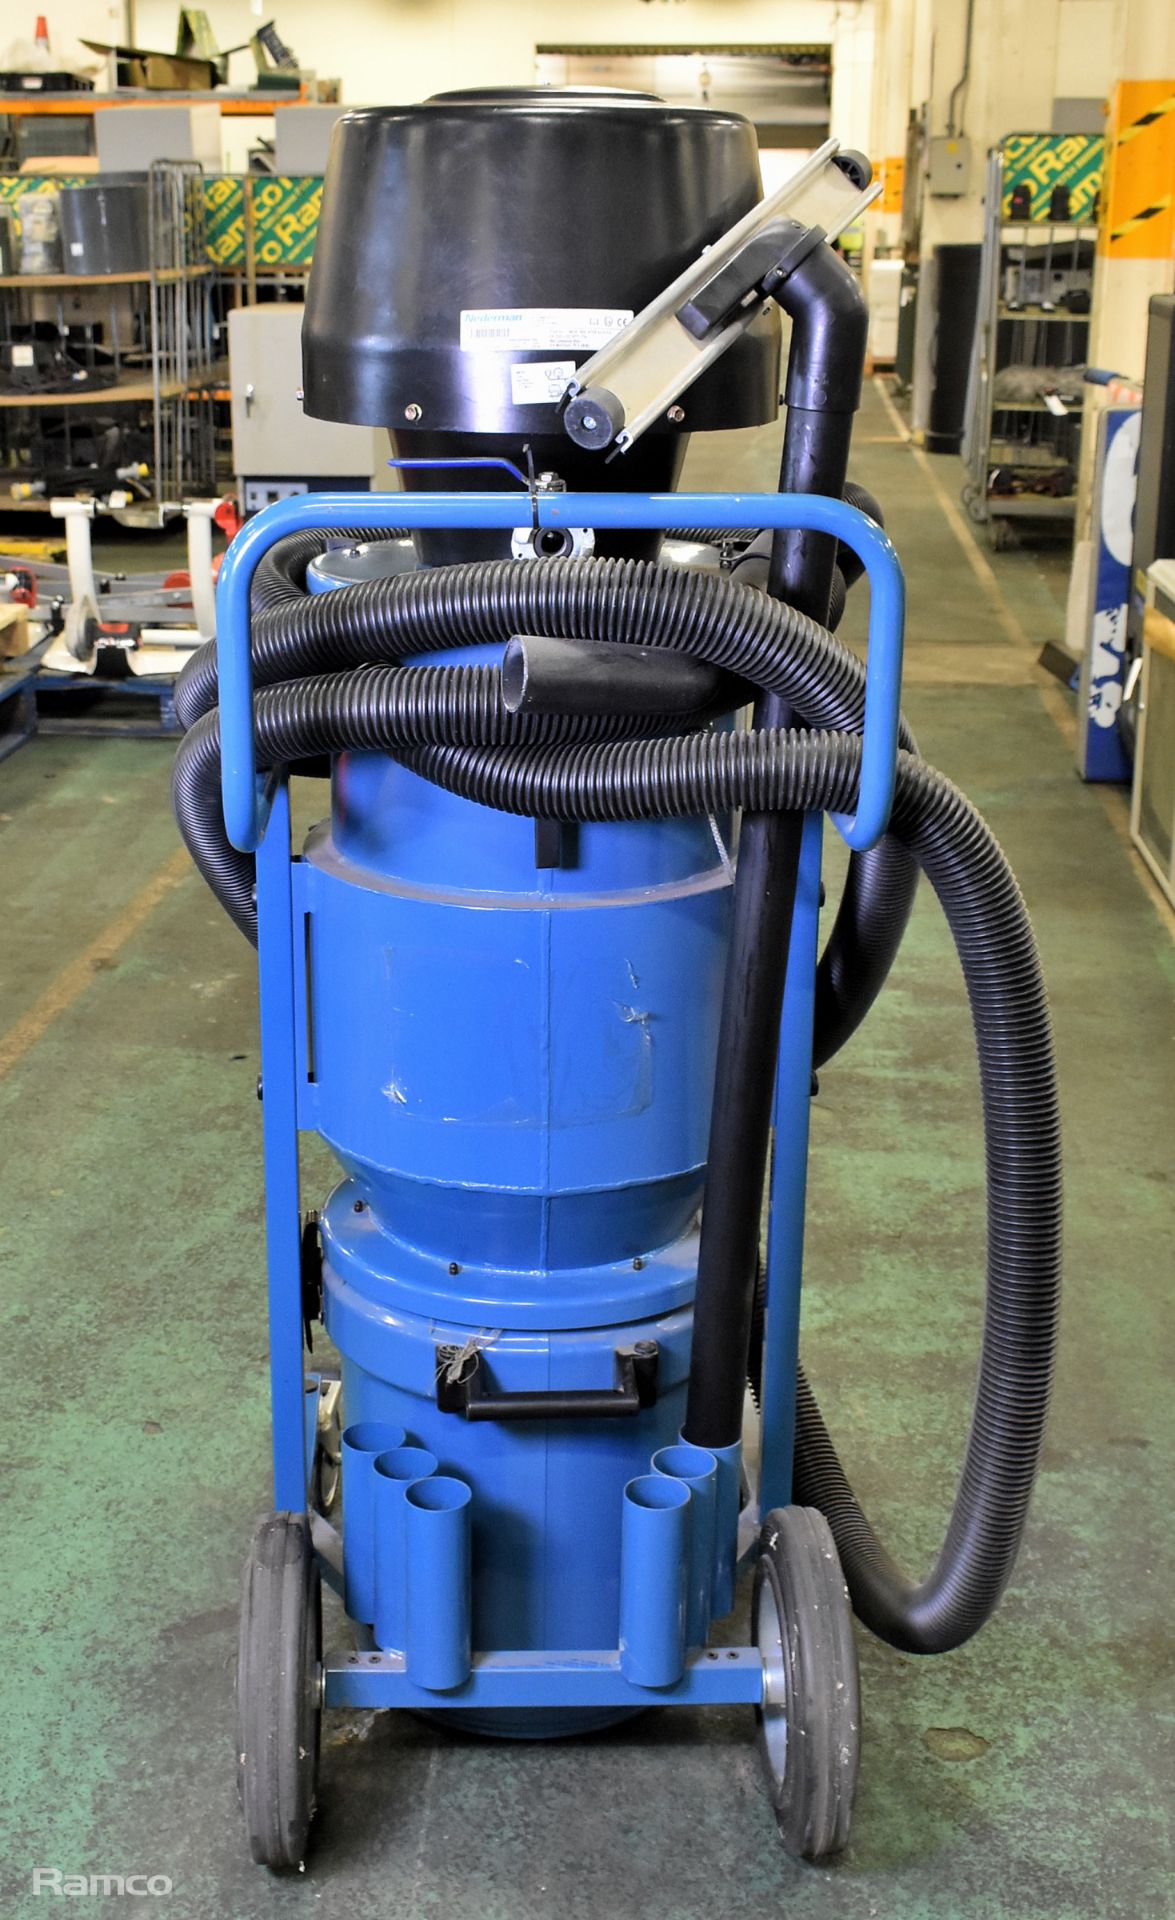 Nederman 216A industrial mobile vacuum cleaner - 8 bar - Image 4 of 6